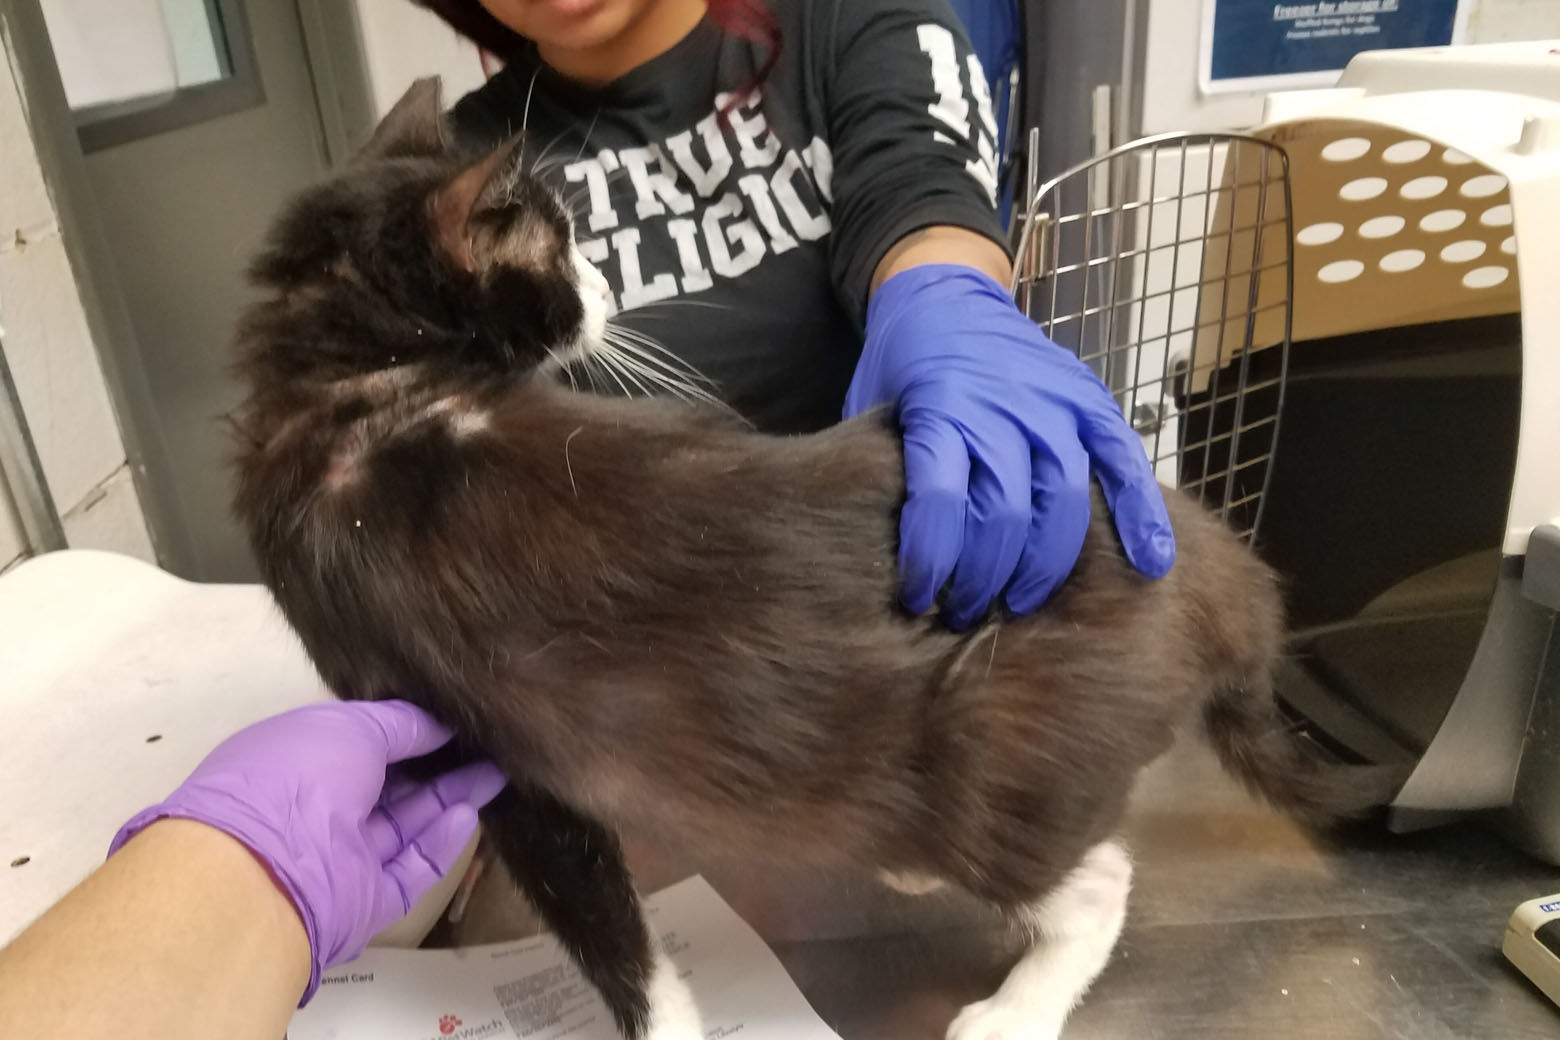 This cat, Foxglove, was suffering from a skin condition. (Courtesy Humane Rescue Alliance)